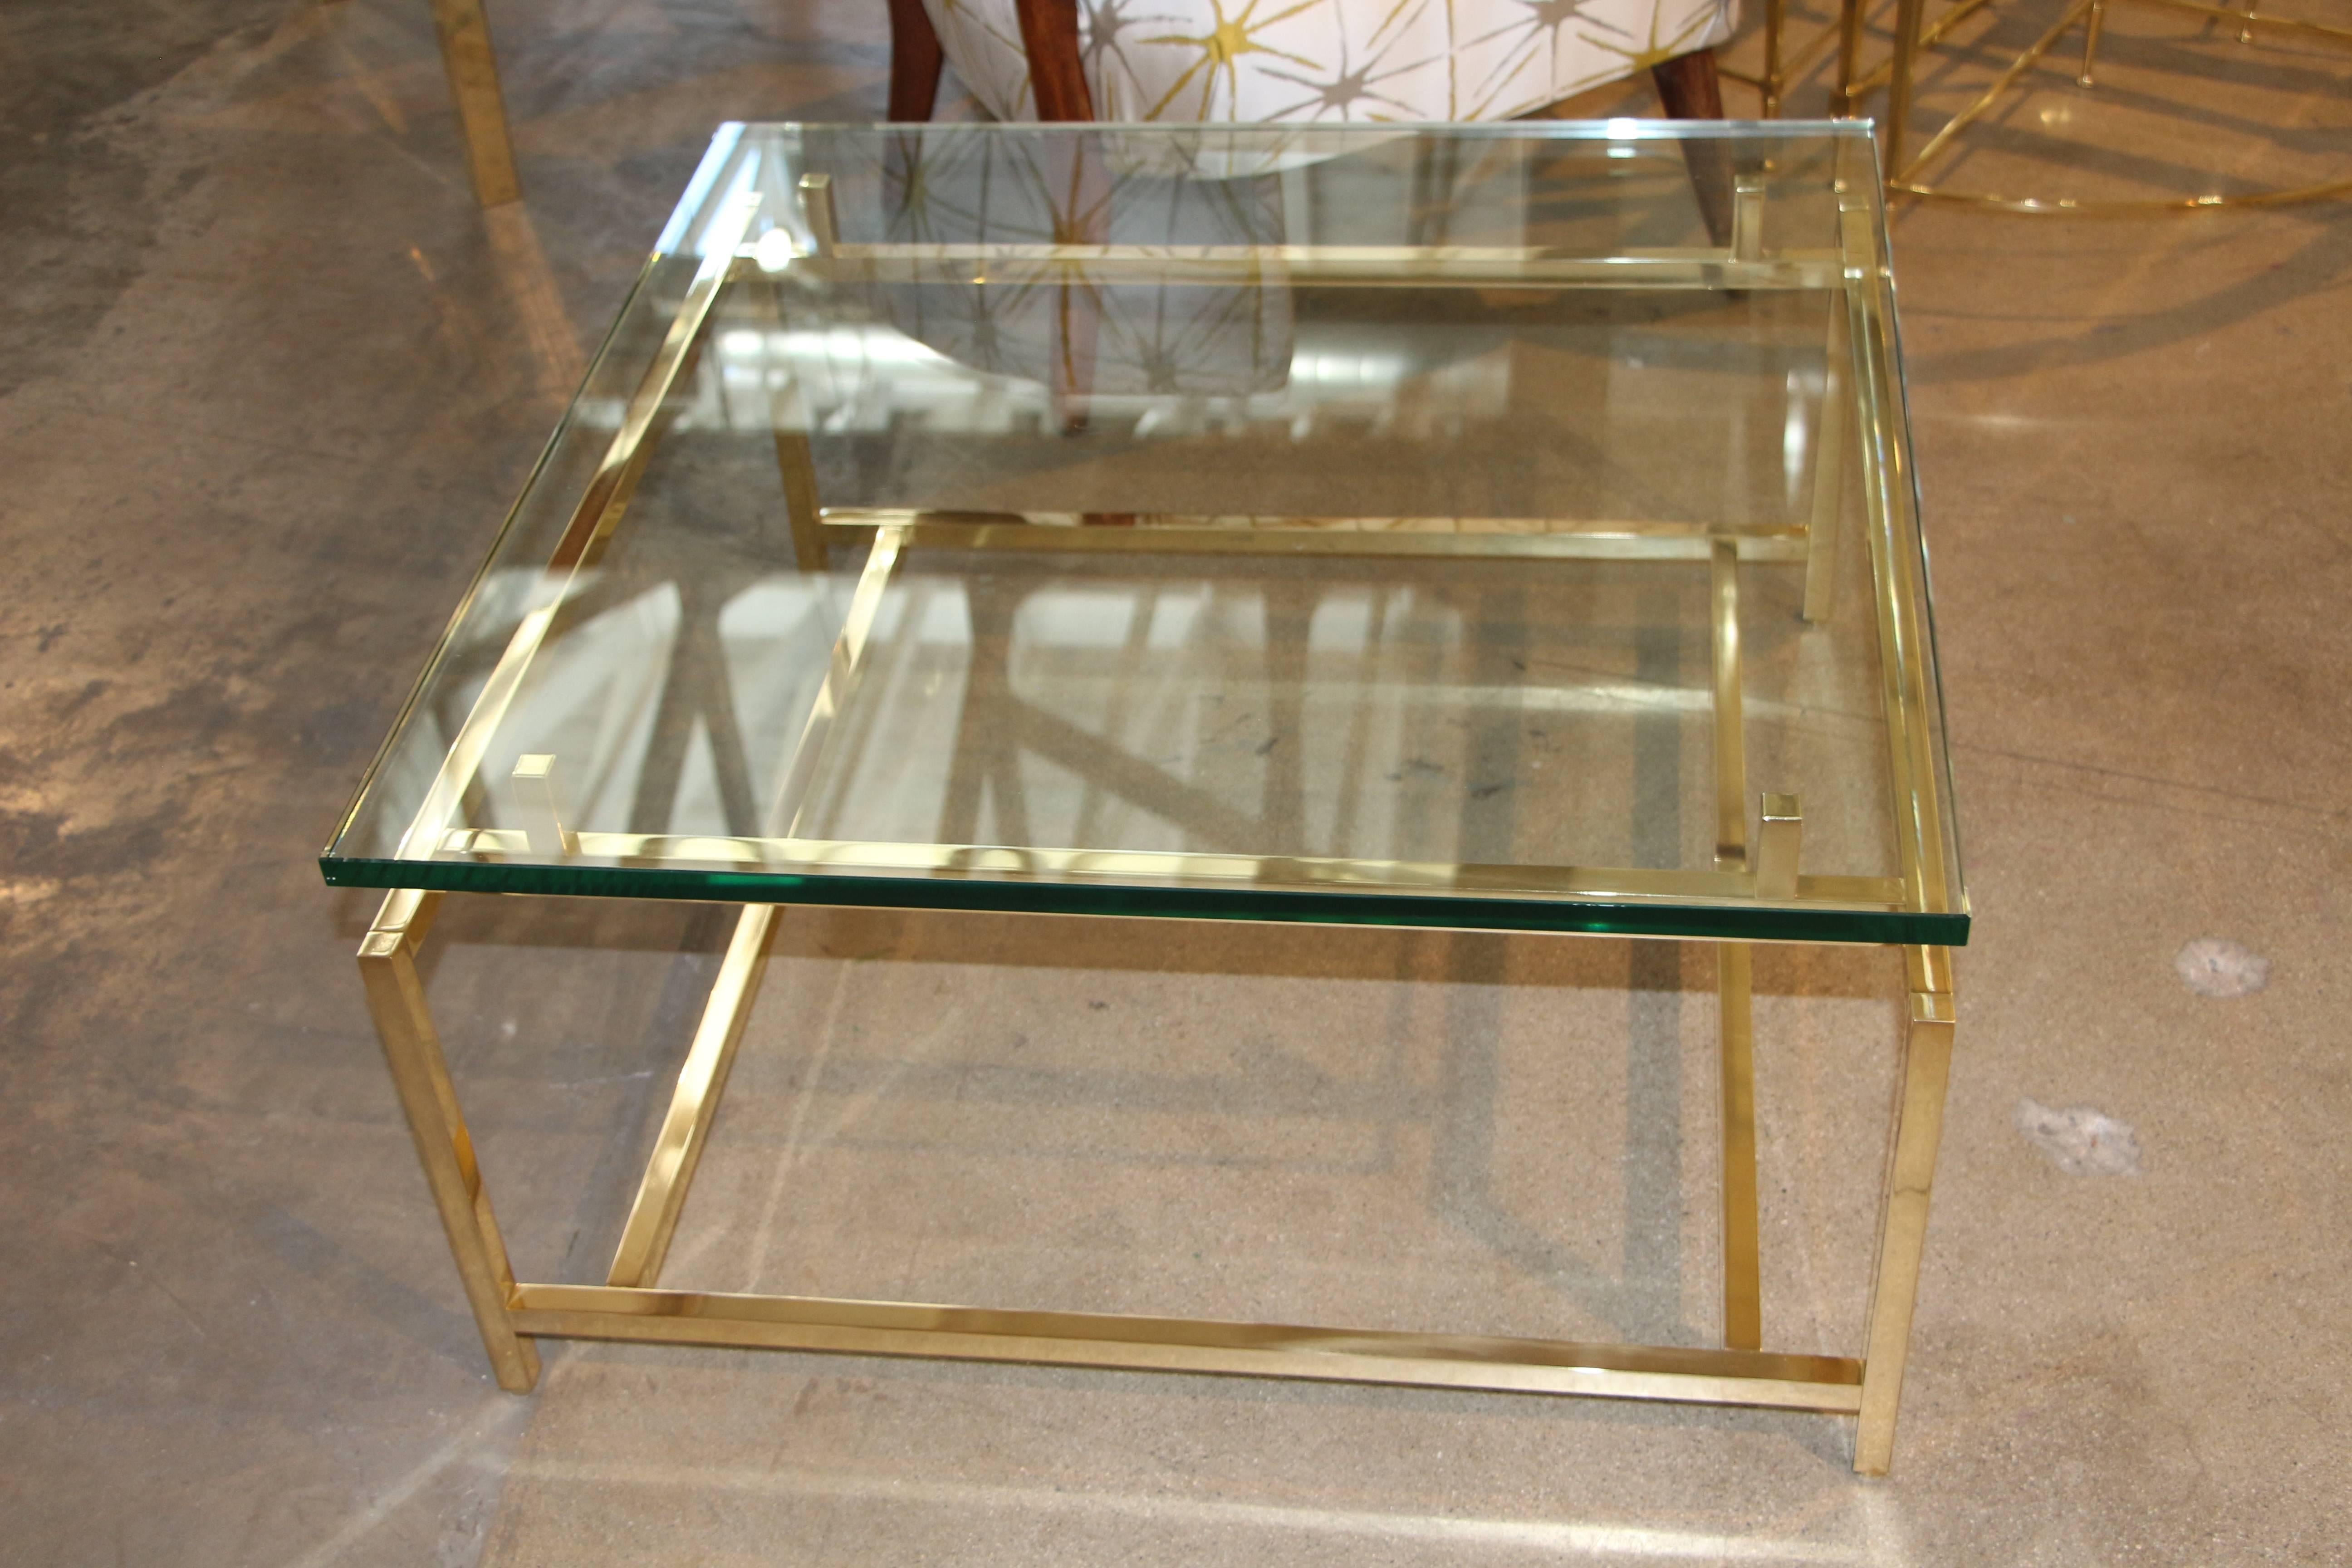 A quite lovely vintage brass cocktail table.
Well constructed with parts that screw together.